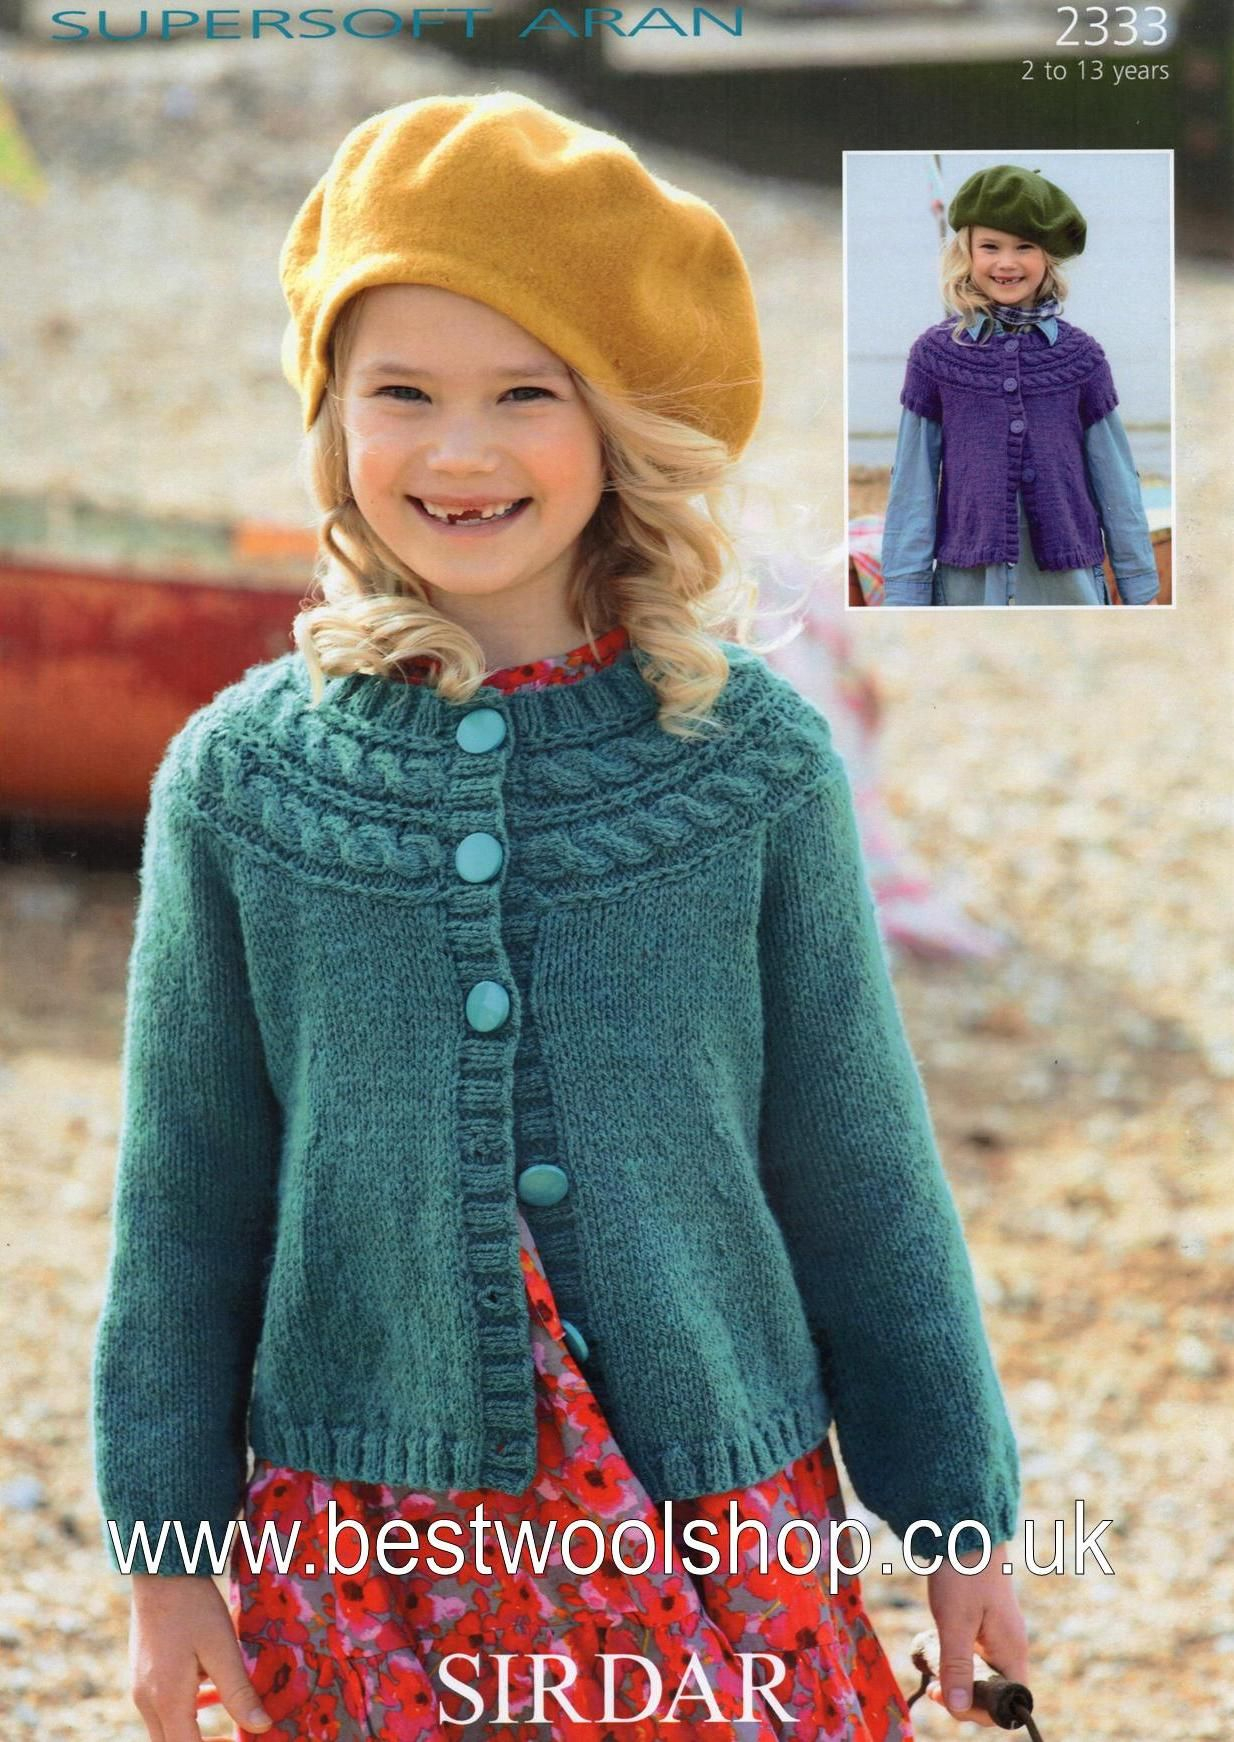 Jumper Knitting Patterns 2333 Sirdar Supersoft Aran Cabled Yolk Long Short Sleeved Cardigan Knitting Pattern To Fit 2 To 13 Years